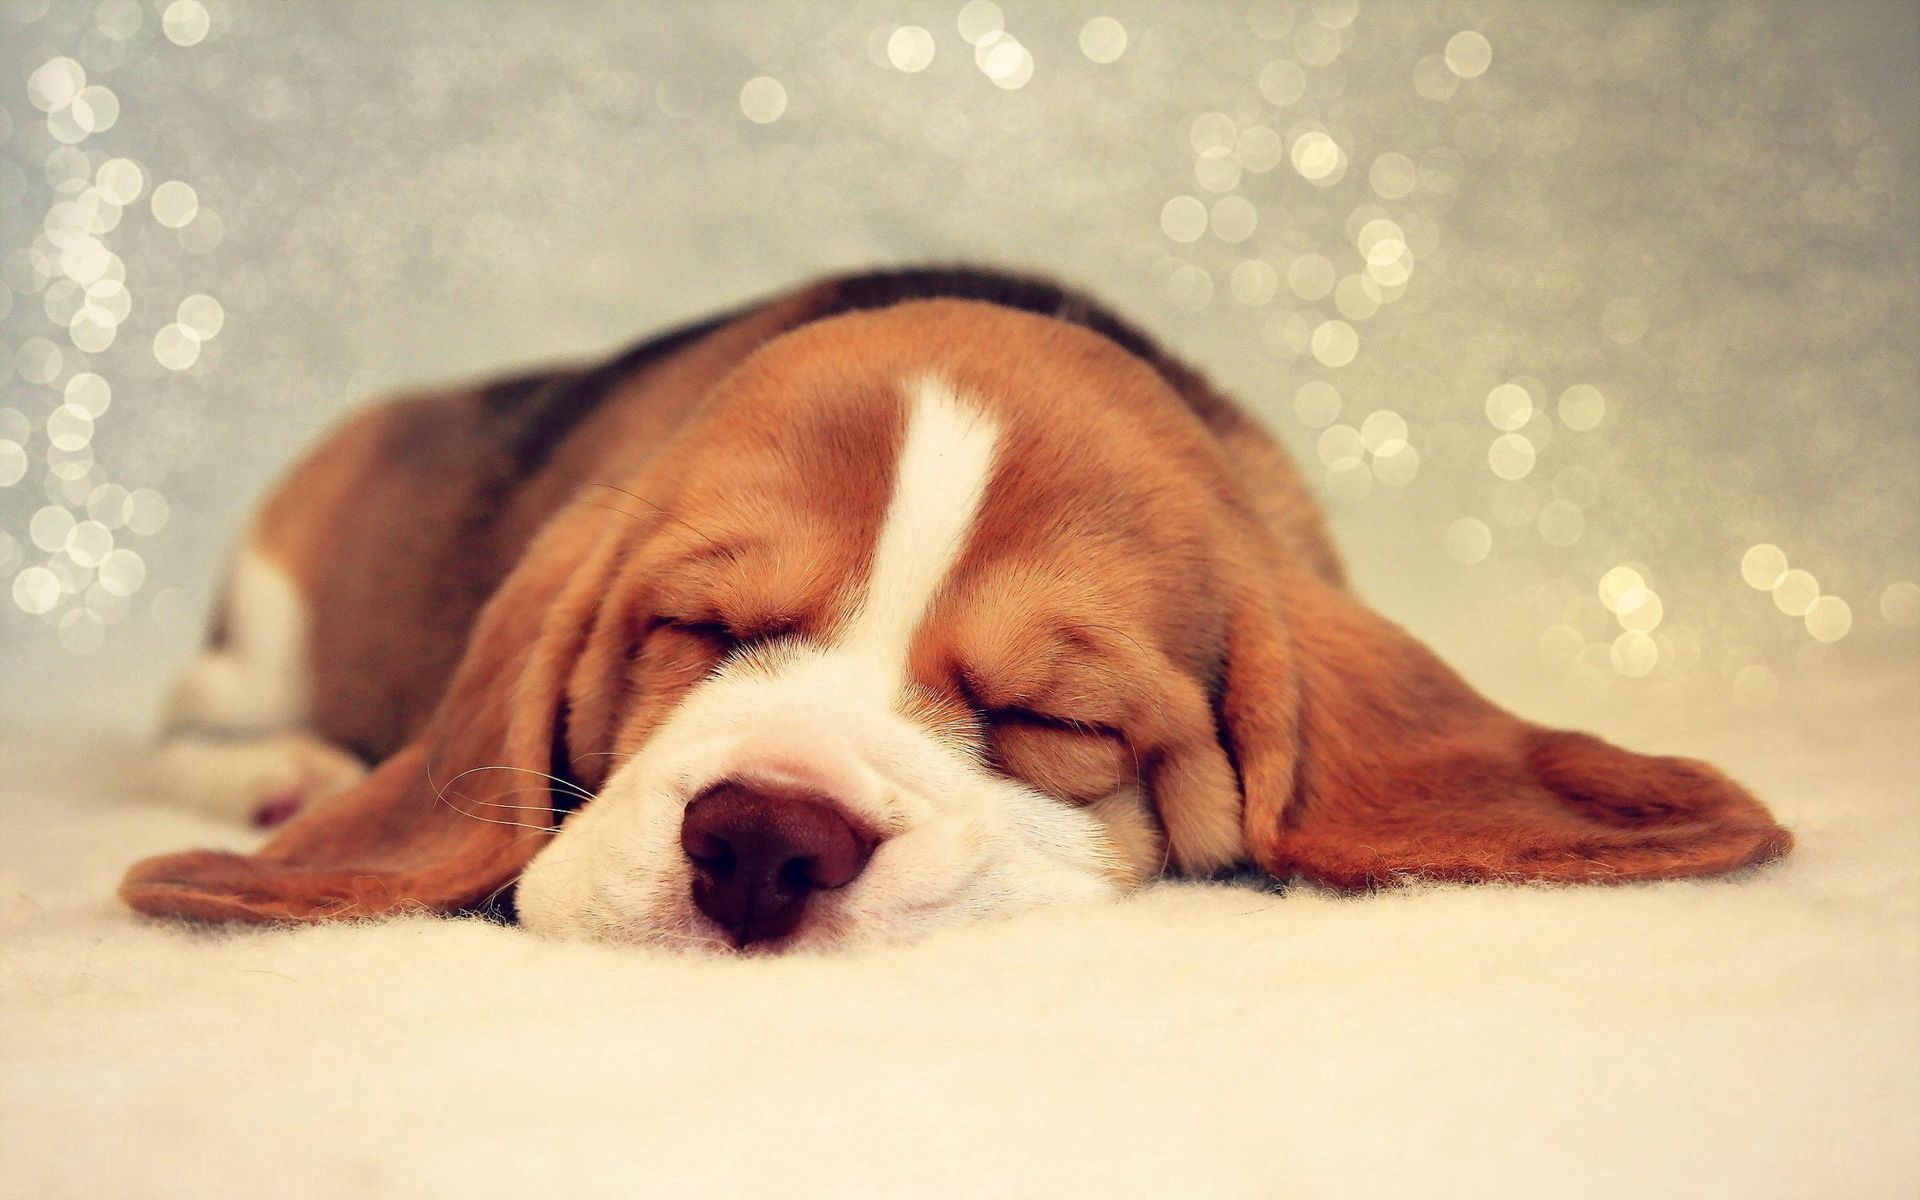 spotted, spotty, animals, dog, muzzle, beautiful, sleep, dream wallpapers for tablet